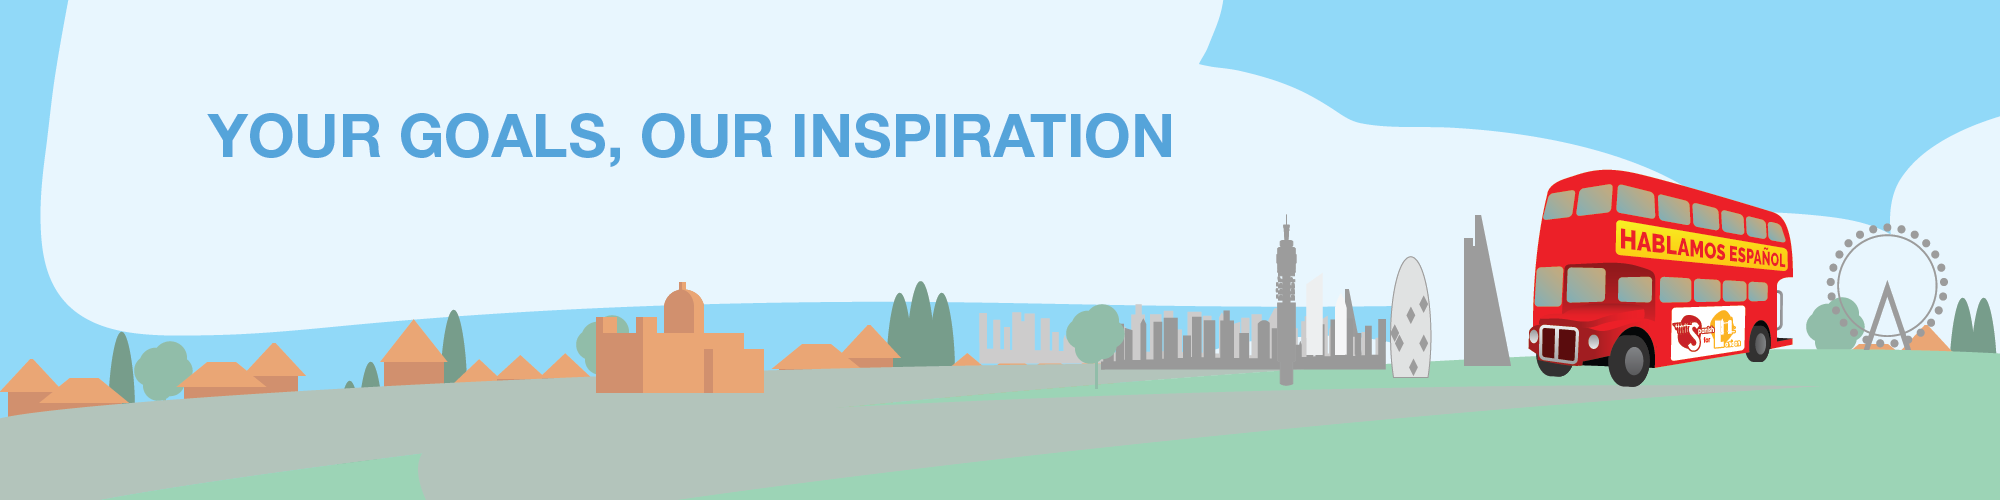 Your Goals, Our Inspiration - Spanish for London